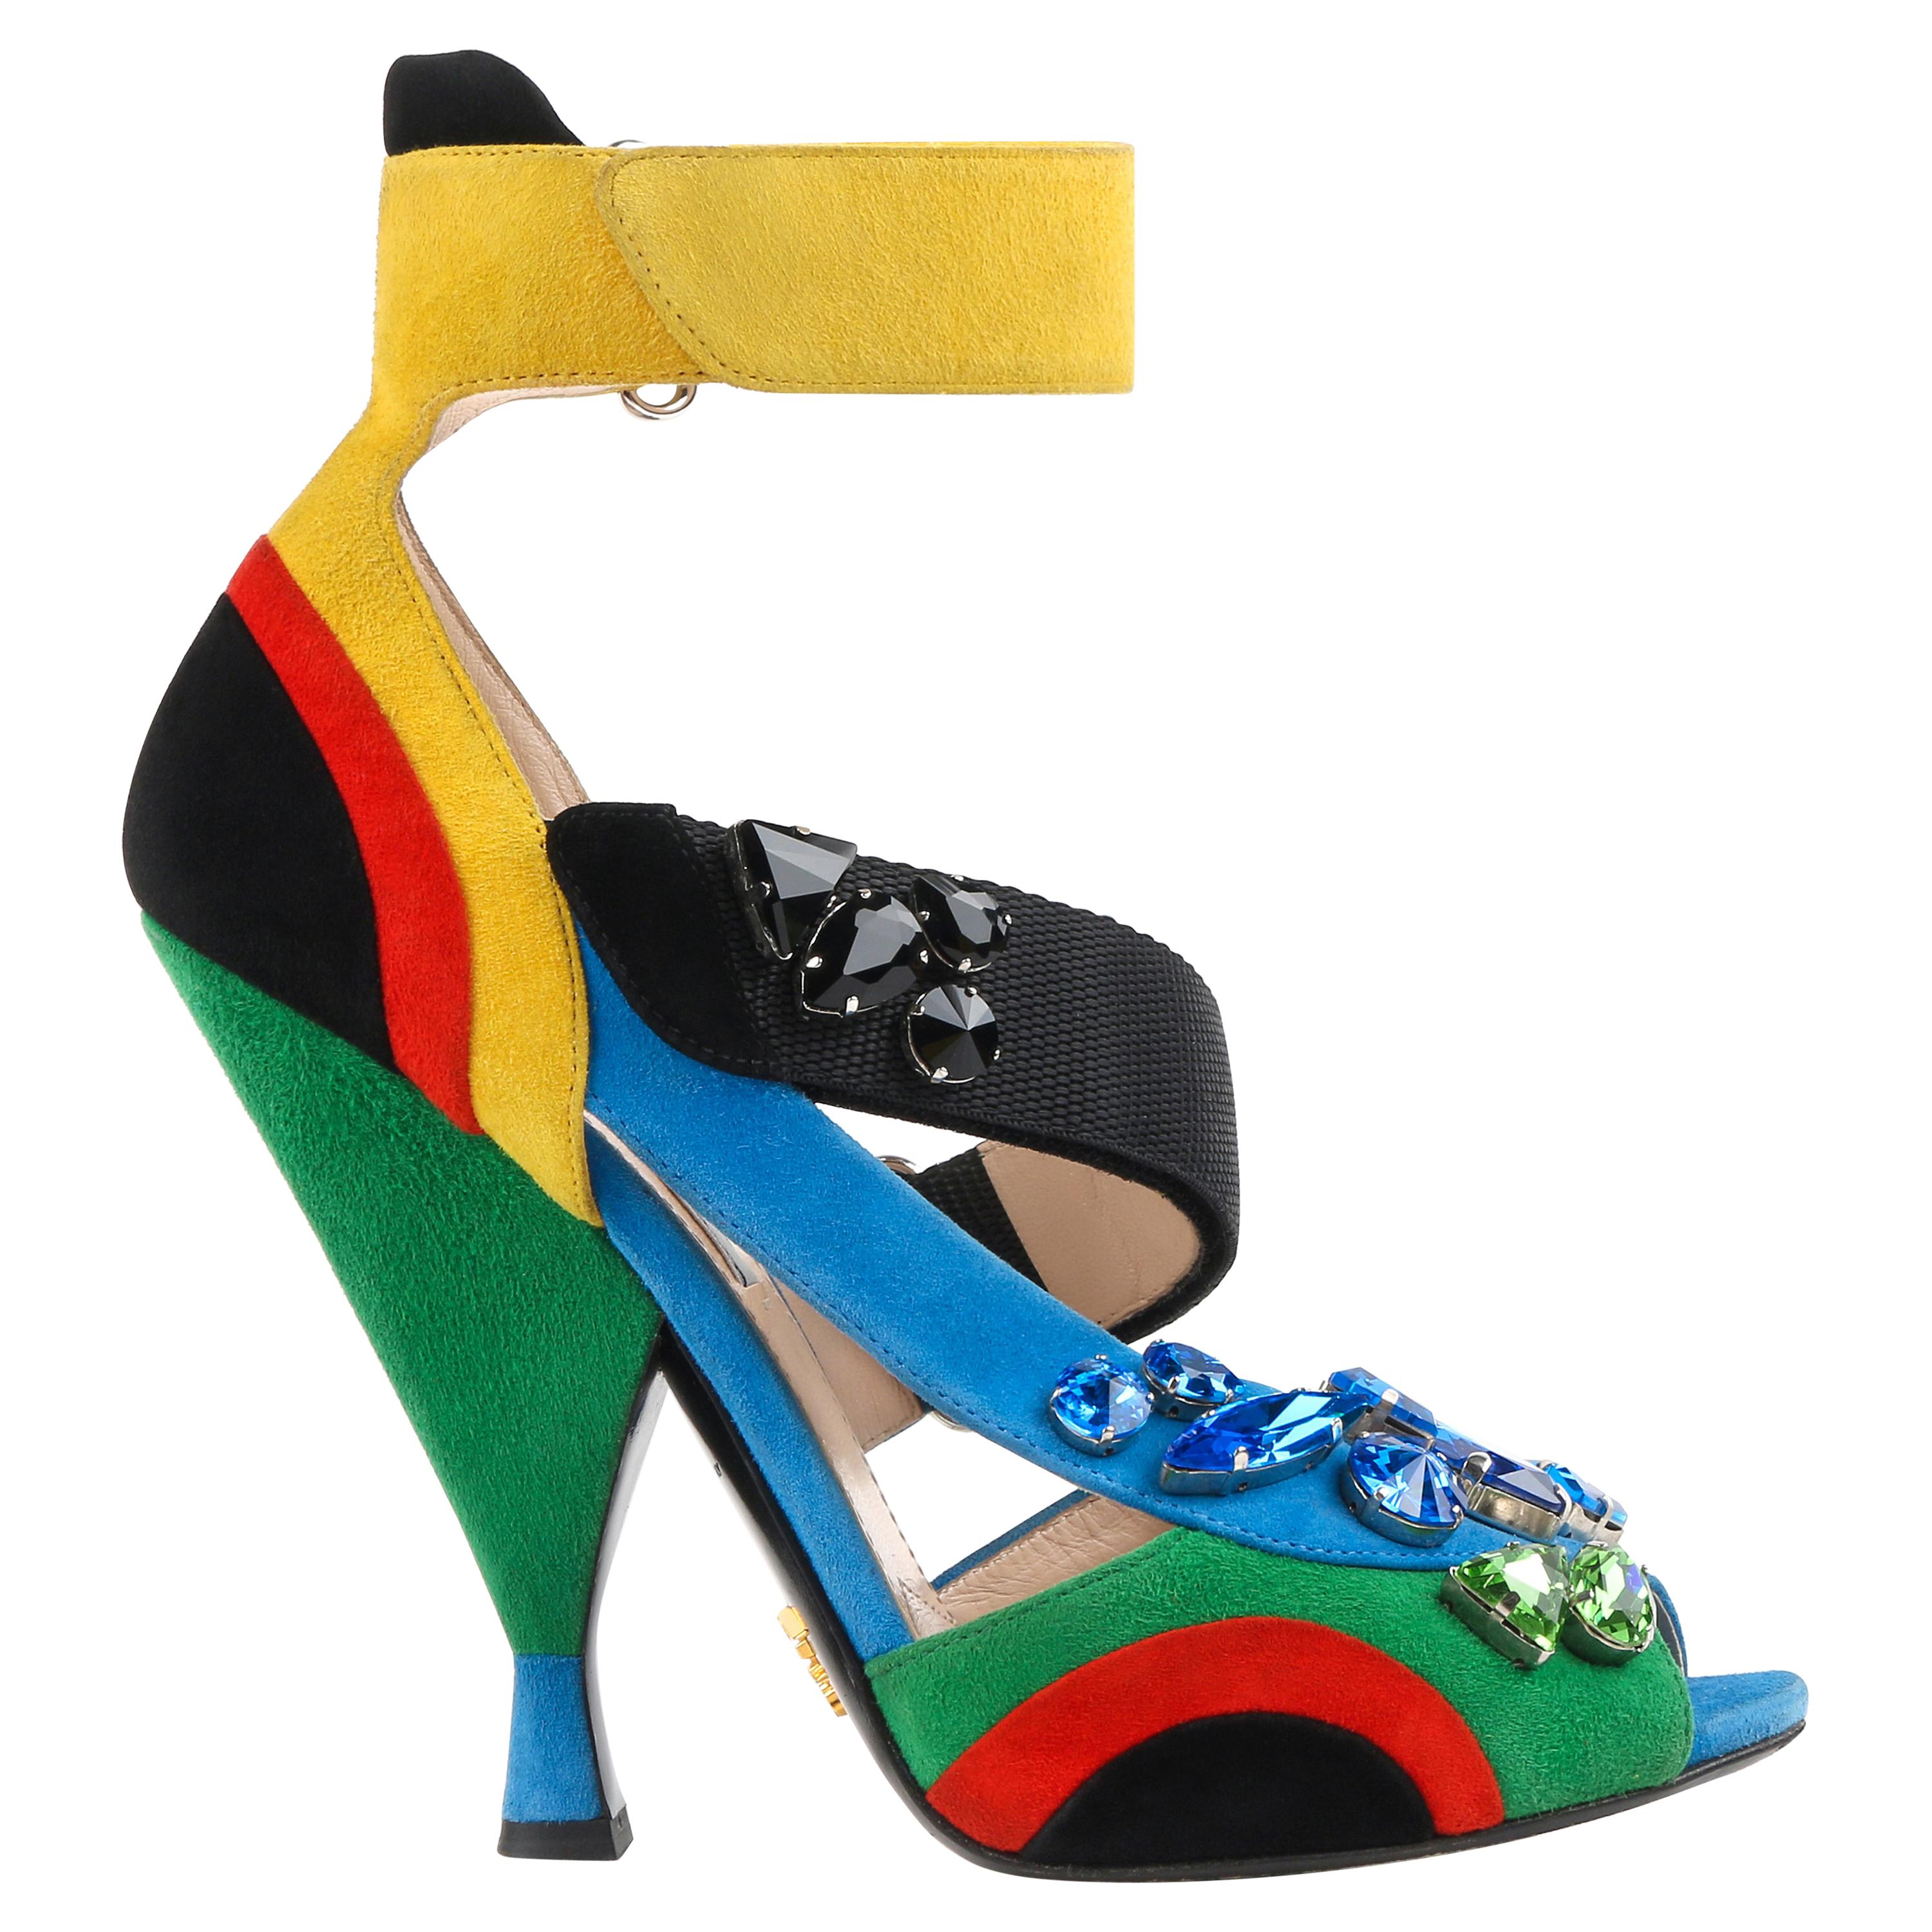 PRADA Color Block Suede Modern Abstract Jeweled Strappy Peep Toe Sandal Pumps